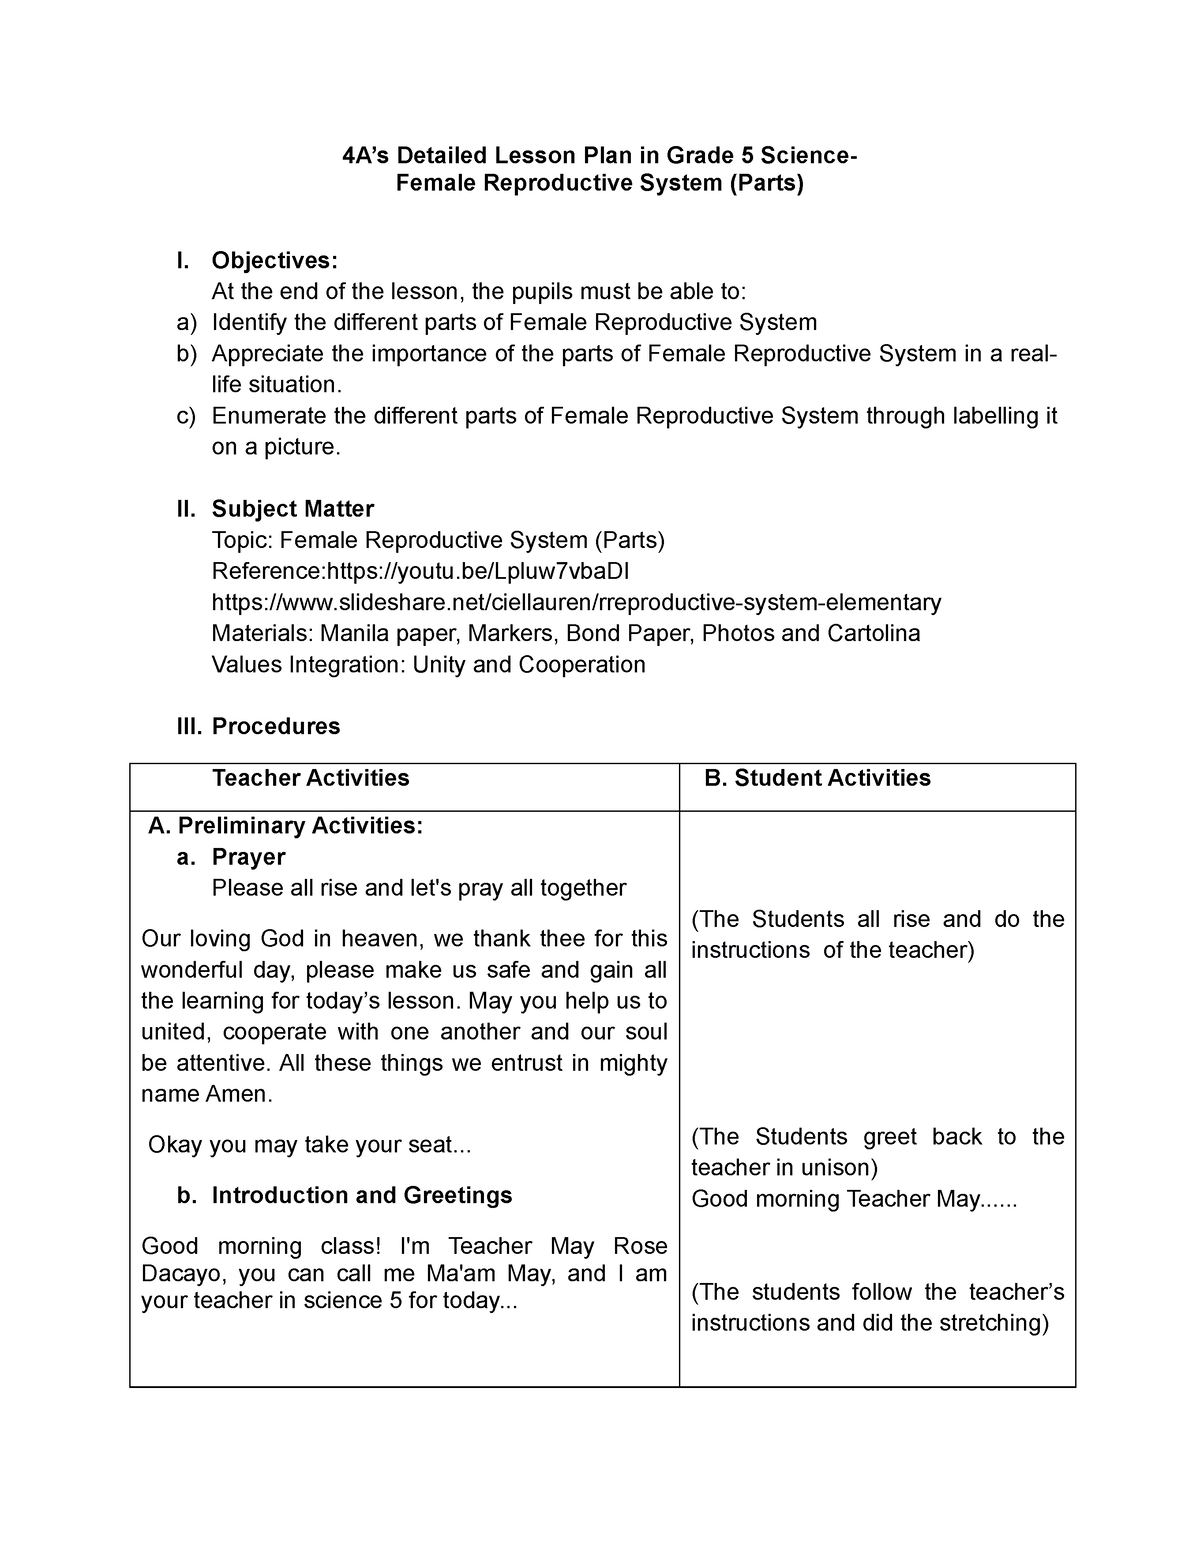 Detailed Lesson Plan Final 4as Detailed Lesson Plan In Grade 5 Science Female Reproductive 5638